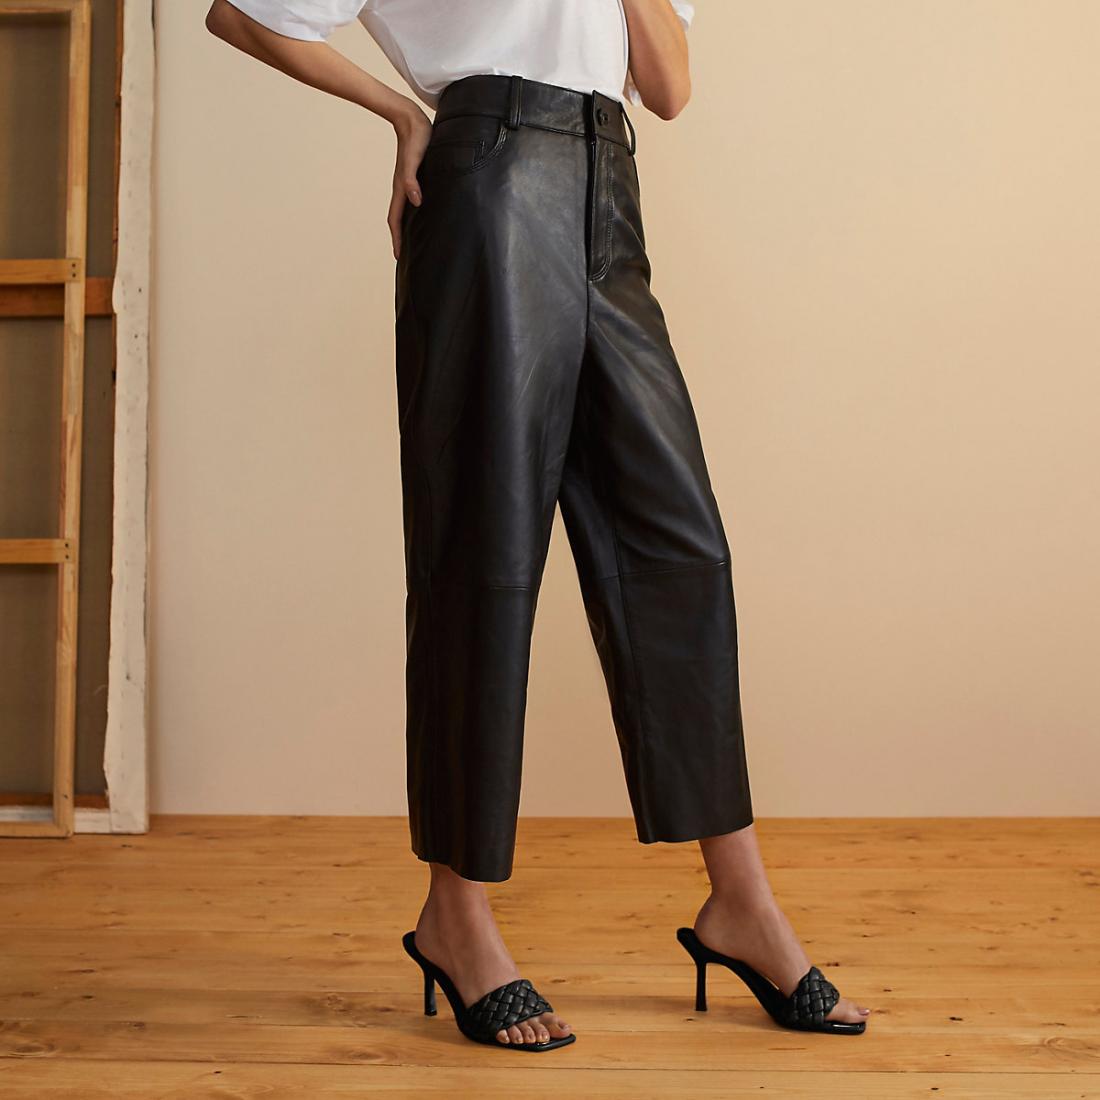 River Island Faux Leather Flared Trousers  Black  verycouk